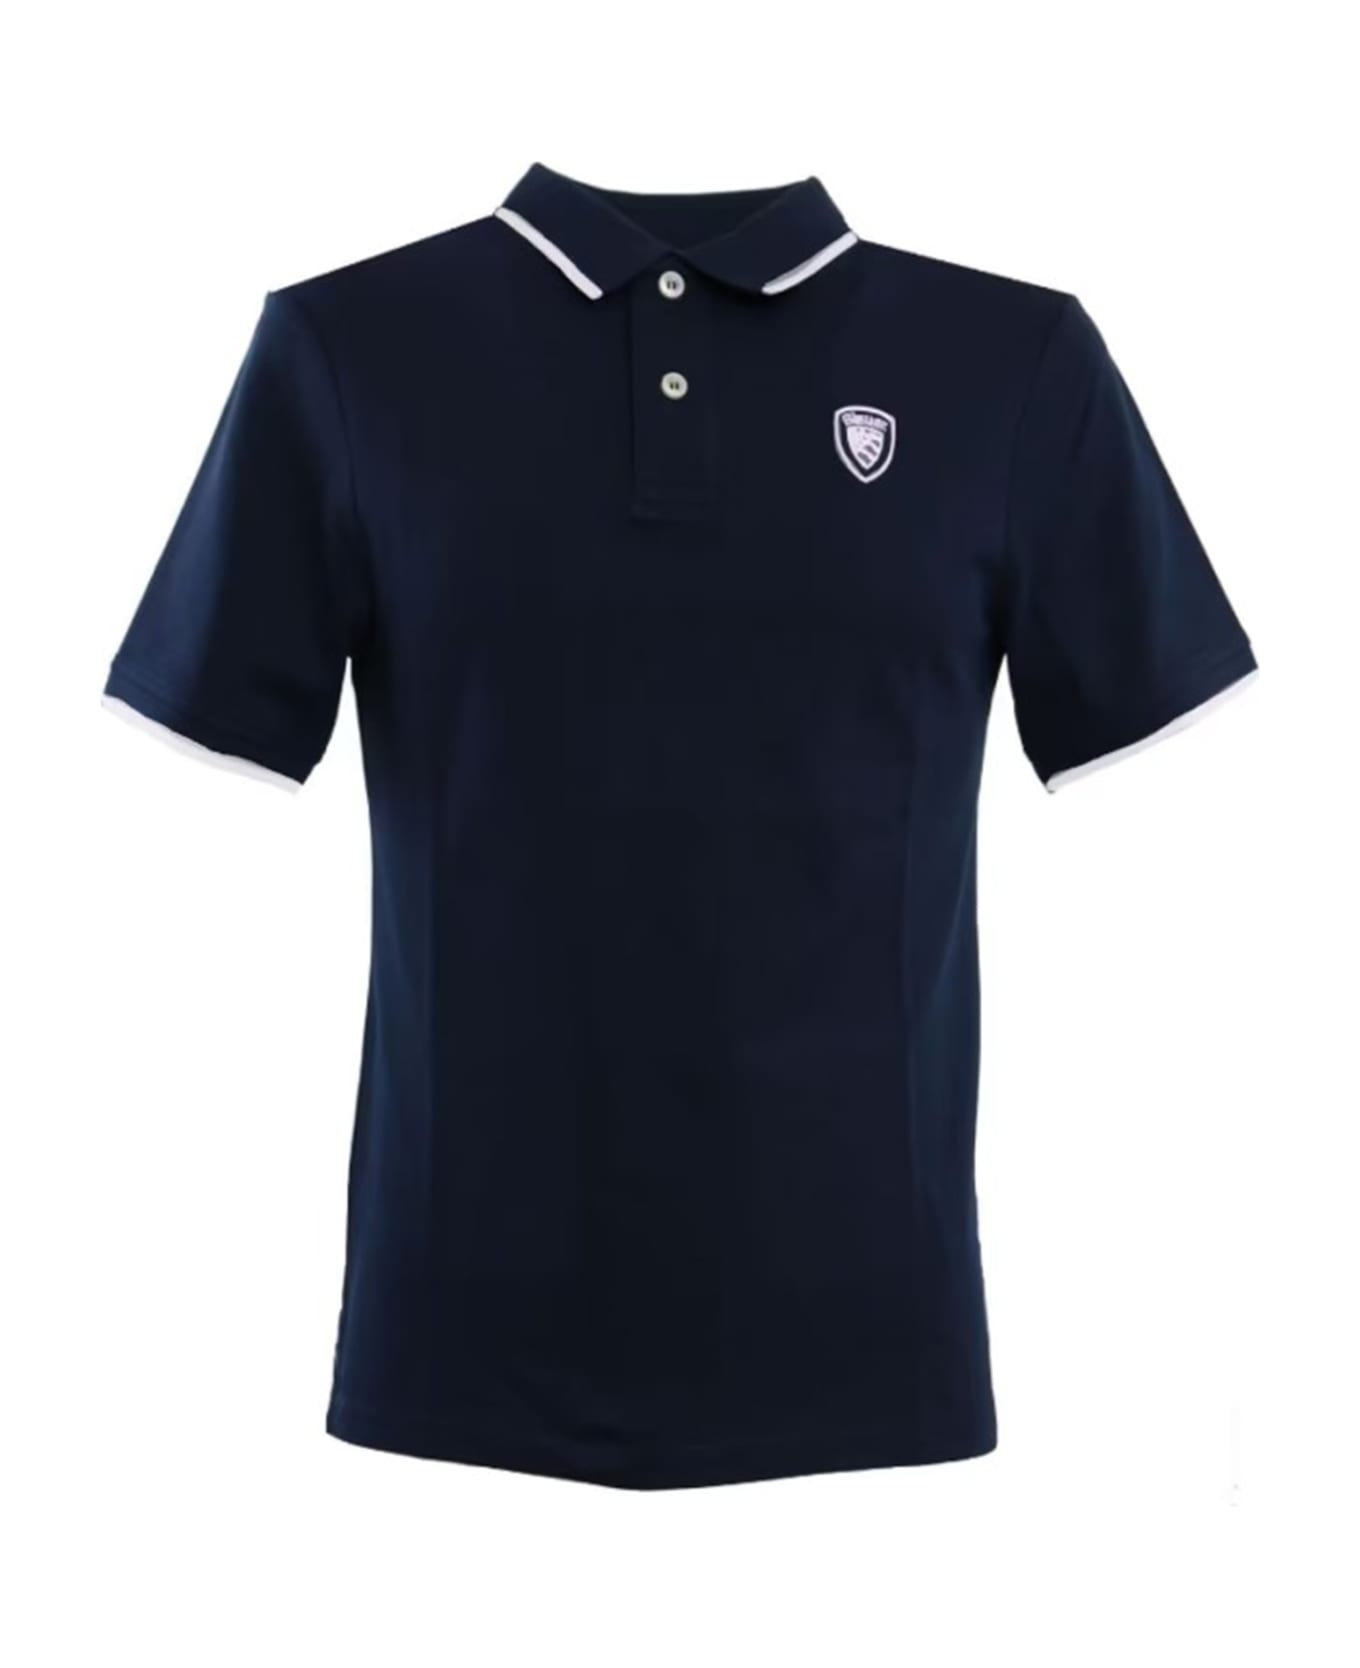 Blauer Navy Blue Short-sleeved Polo Shirt With Inserts - Blu